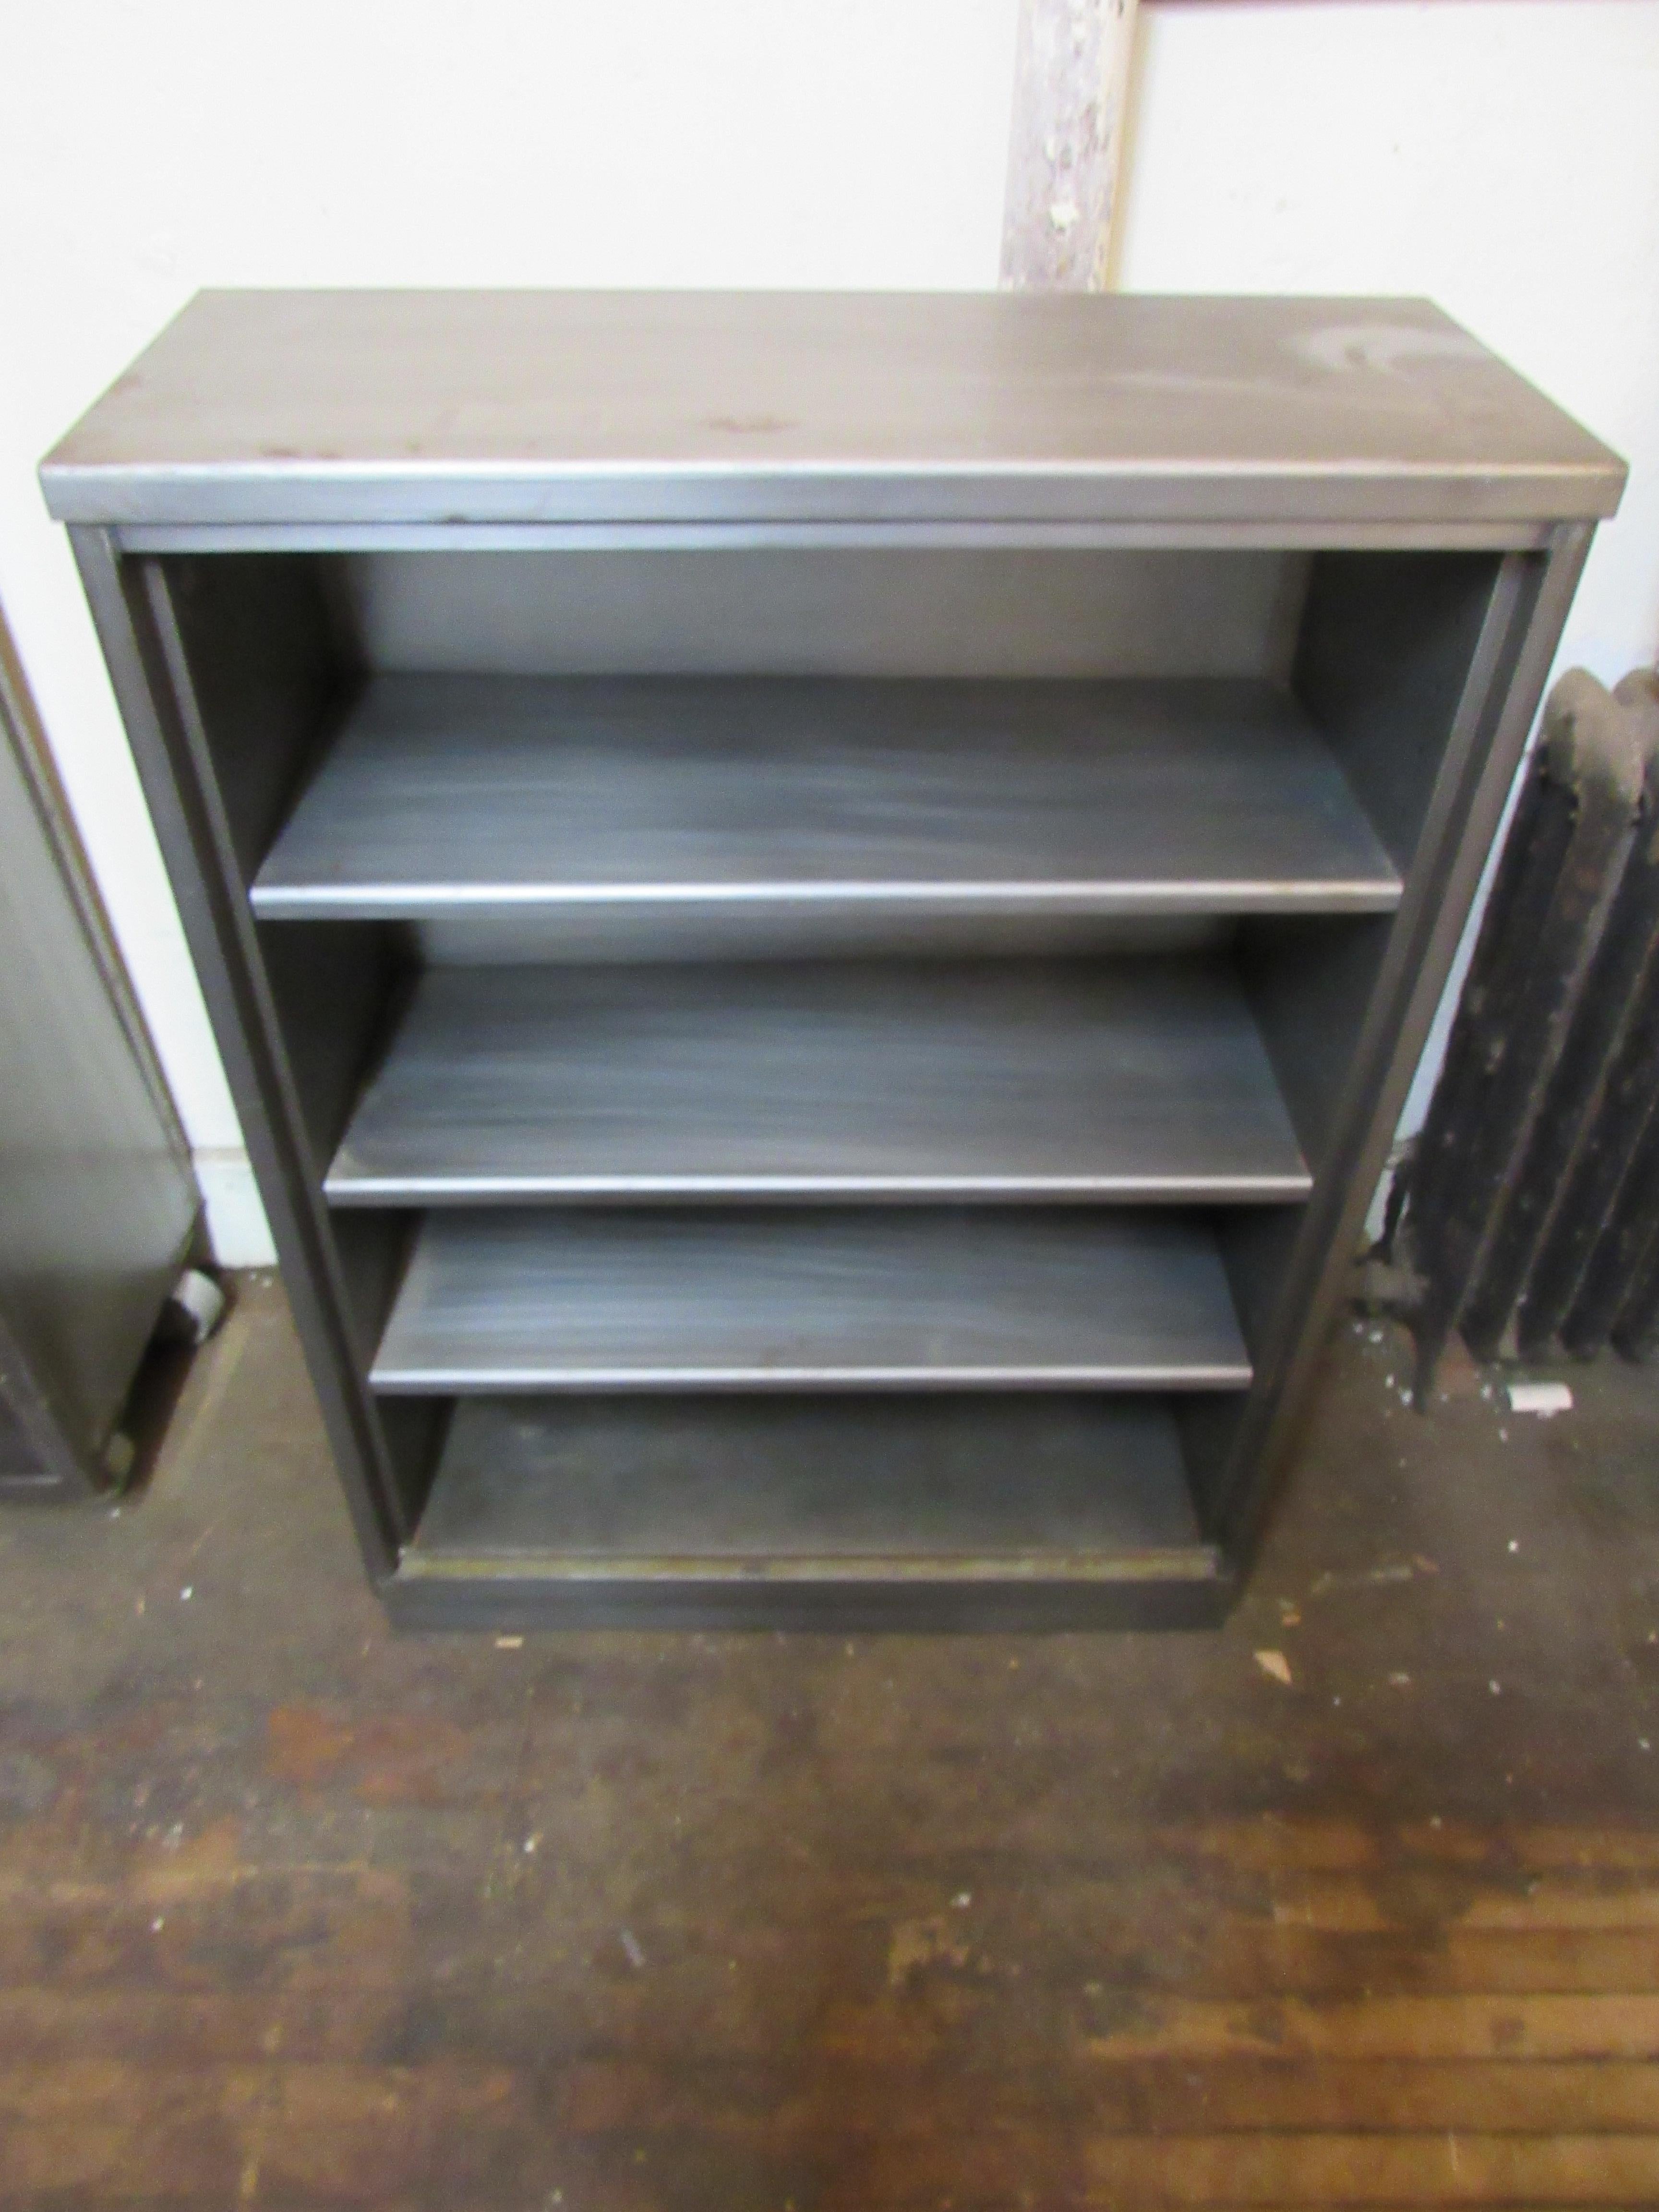 Four foot high metal bookcase with three adjustable shelves. This piece has been taken down to bare metal and then sealed, giving a handsome industrial finish.
Please confirm location NY or NJ